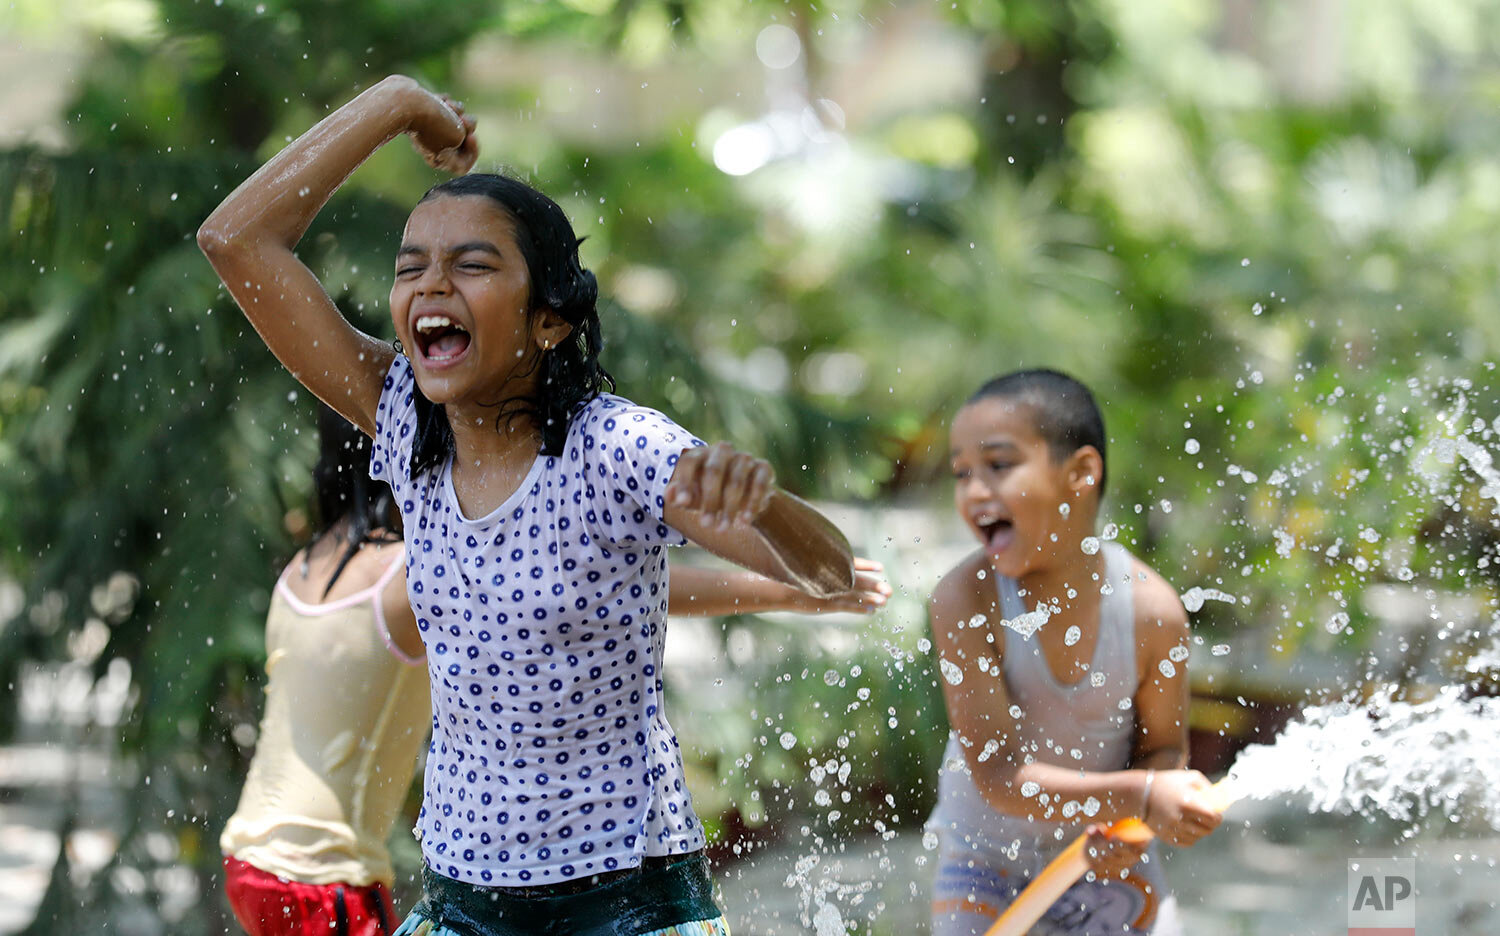  Children cool off with water splashing from a pipe on a hot summer day in Fatehpur, India, Sunday, May 17, 2020. (AP Photo/Rajesh Kumar Singh) 